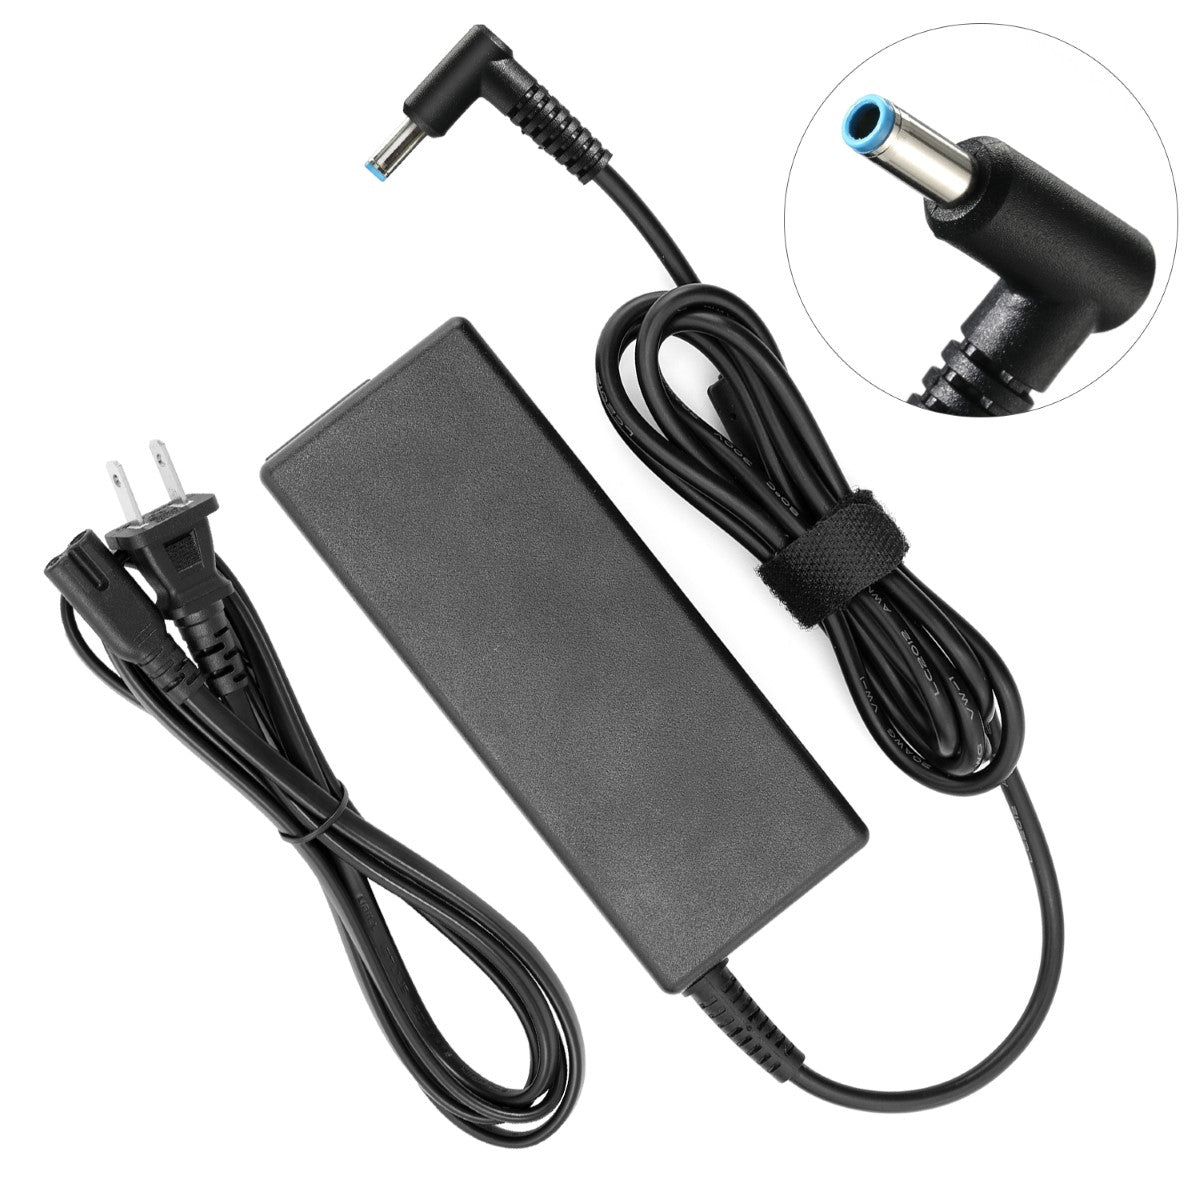 AC Adapter Charger for HP Envy Touchsmart 17-j083ca Notebook.